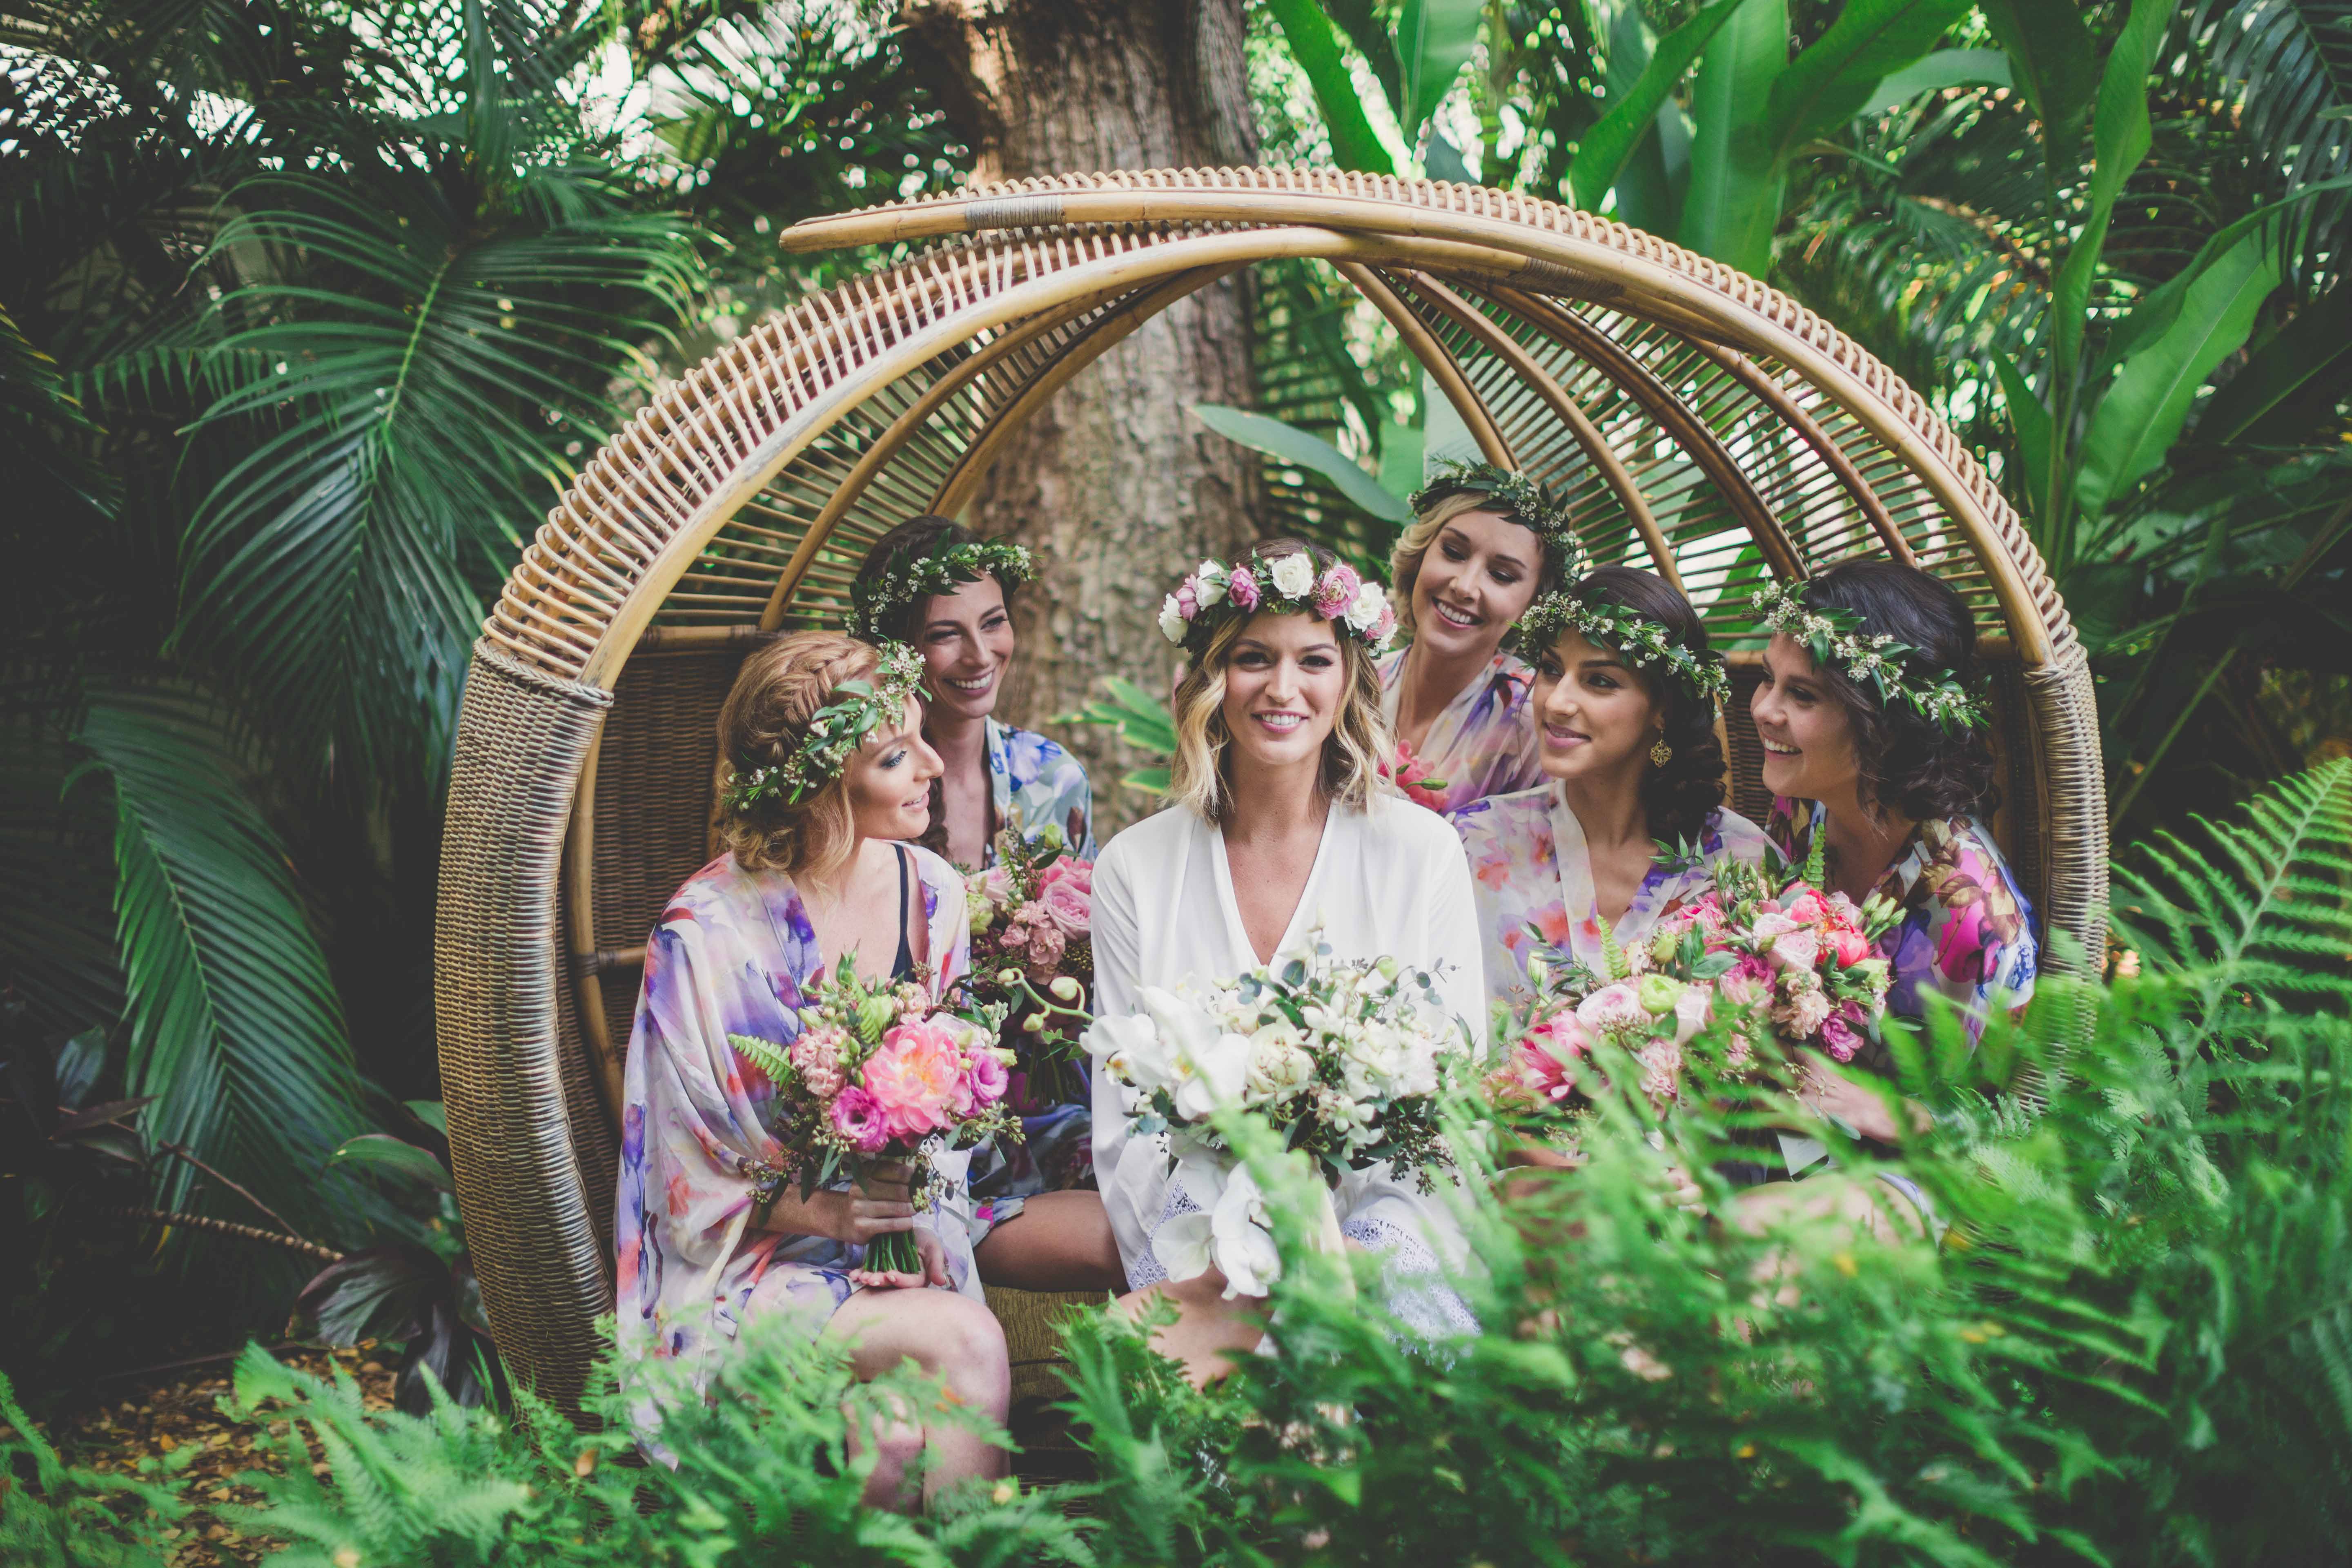 bride with bridesmaids in flower crowns in rattan circle chair